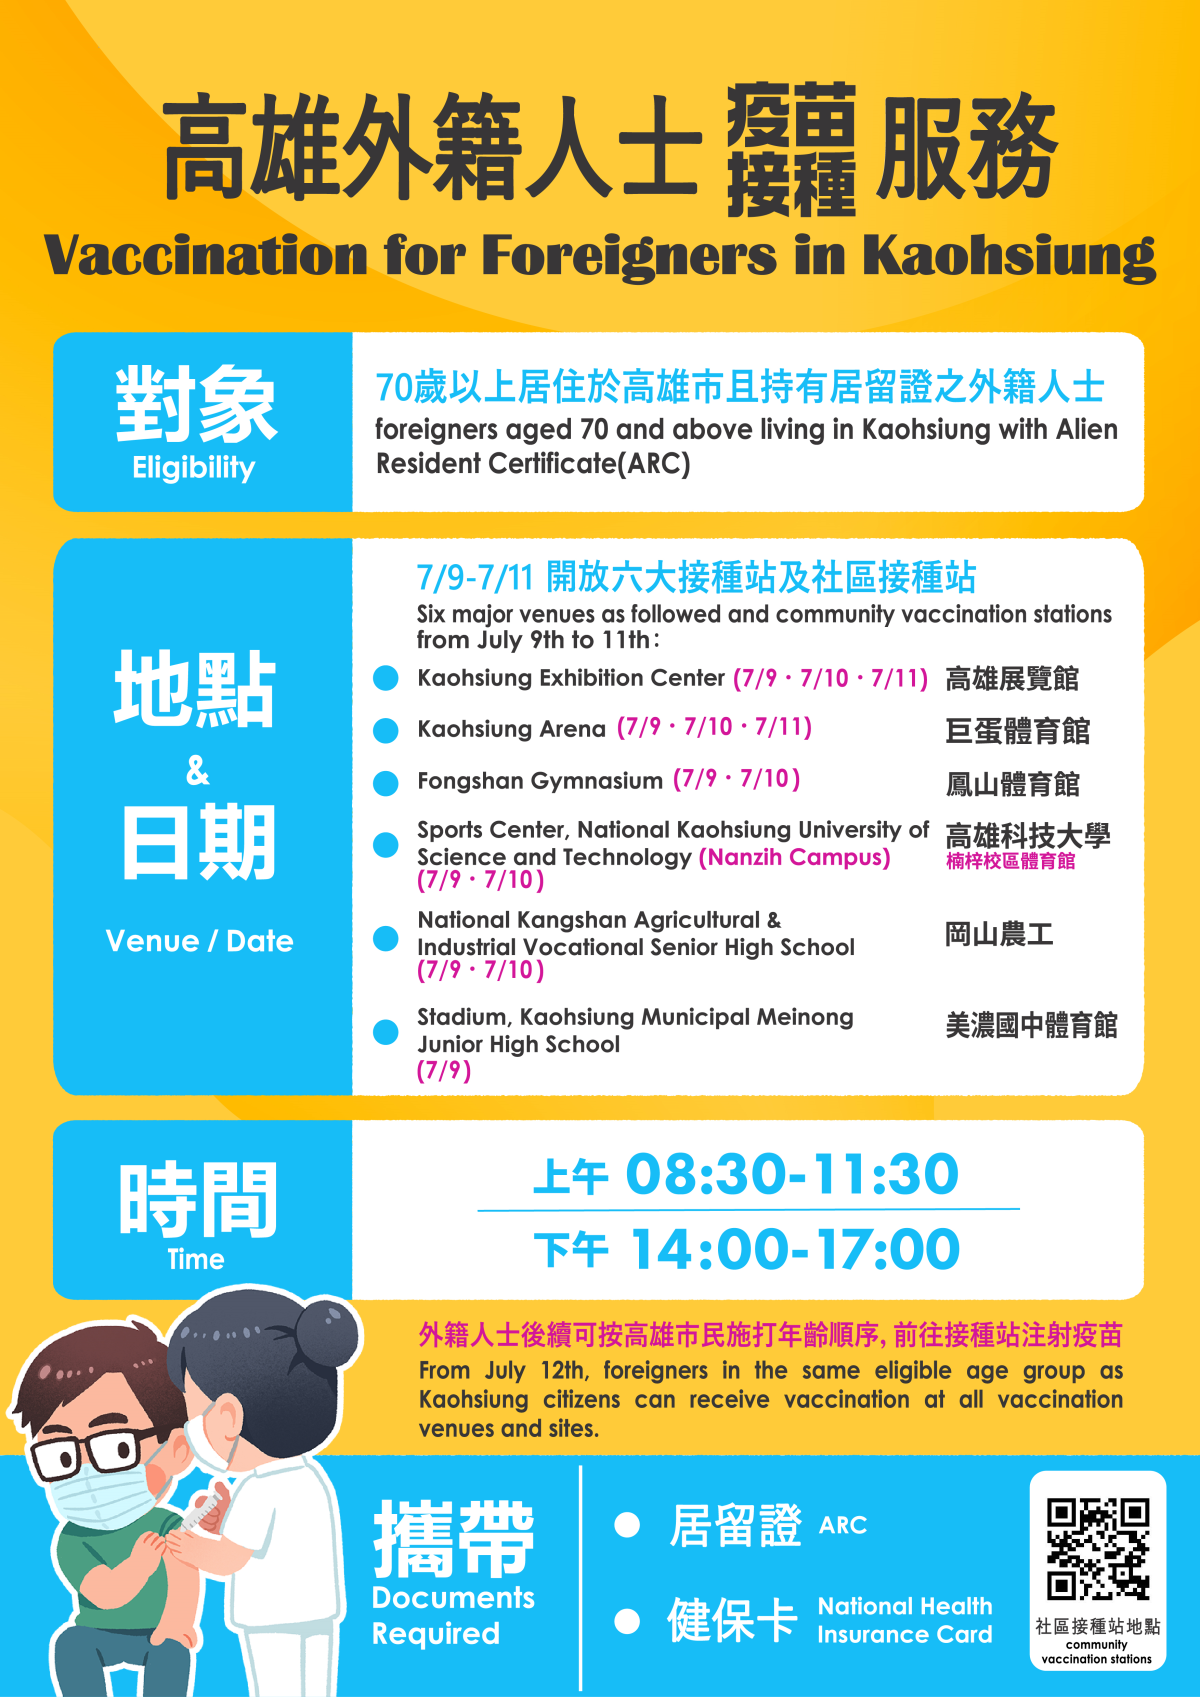 Vaccination for Foreigners in Kaohsiung